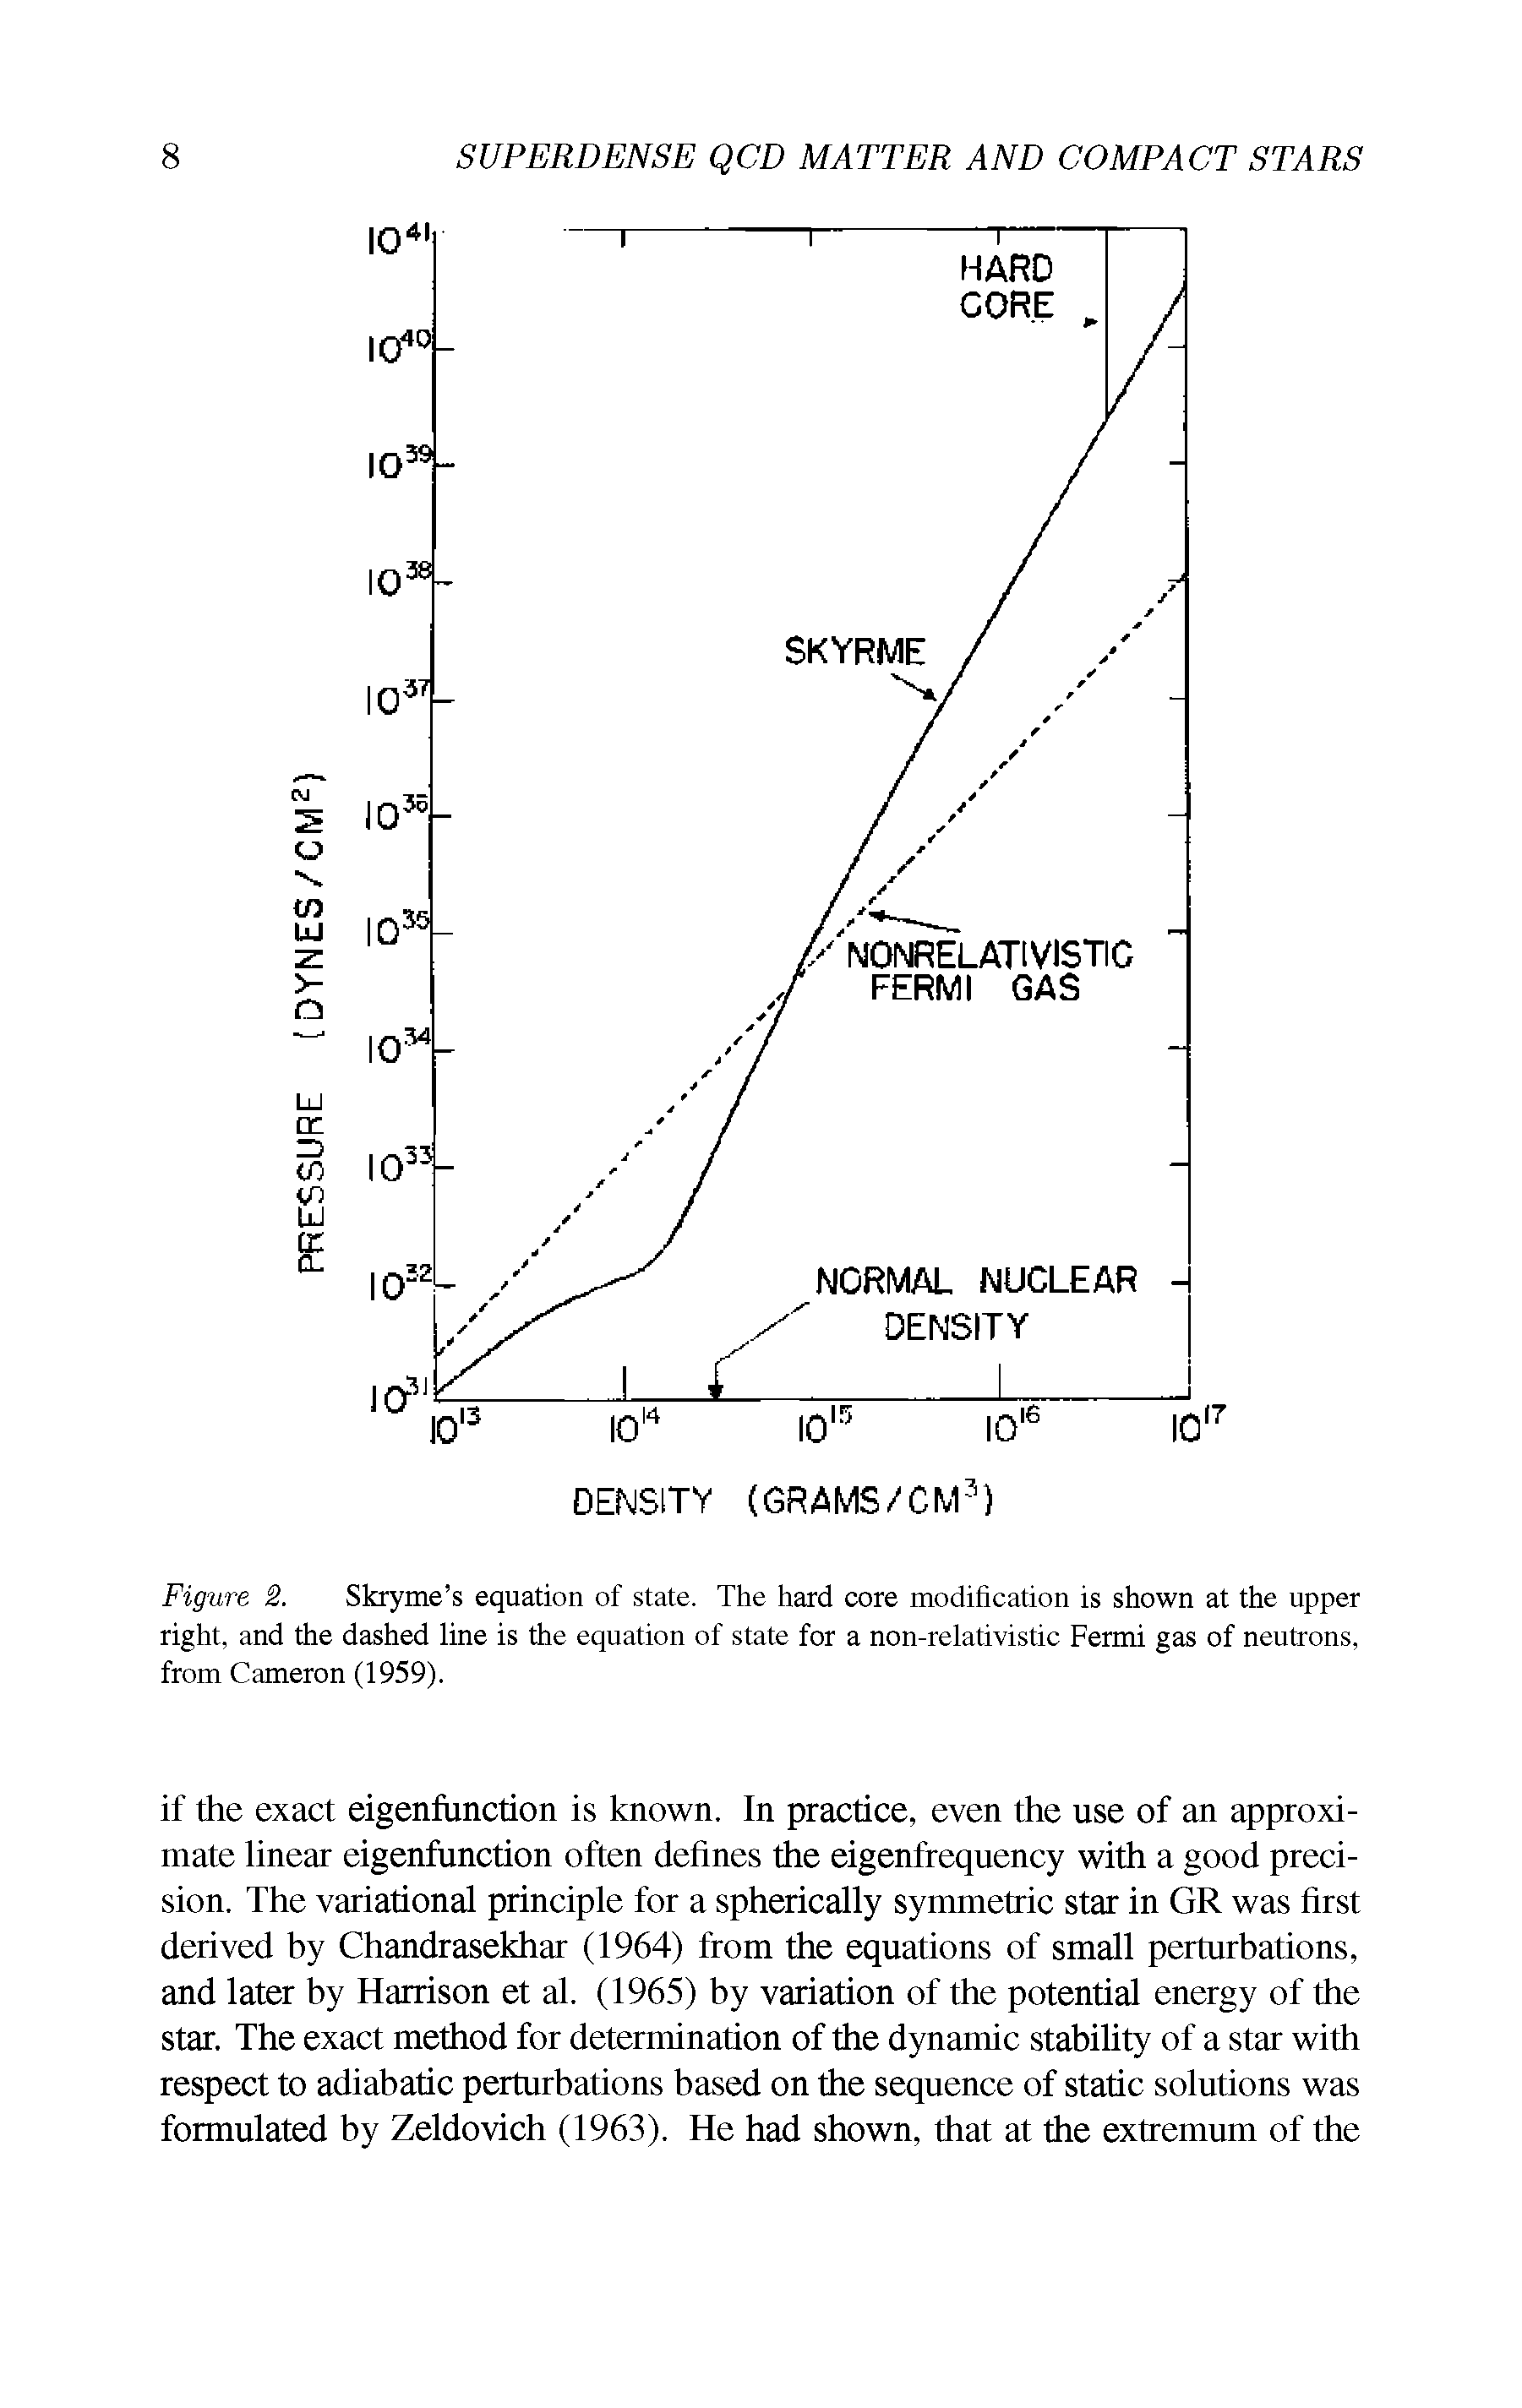 Figure 2. Skryme s equation of state. The hard core modification is shown at the upper right, and the dashed line is the equation of state for a non-relativistic Fermi gas of neutrons, from Cameron (1959).